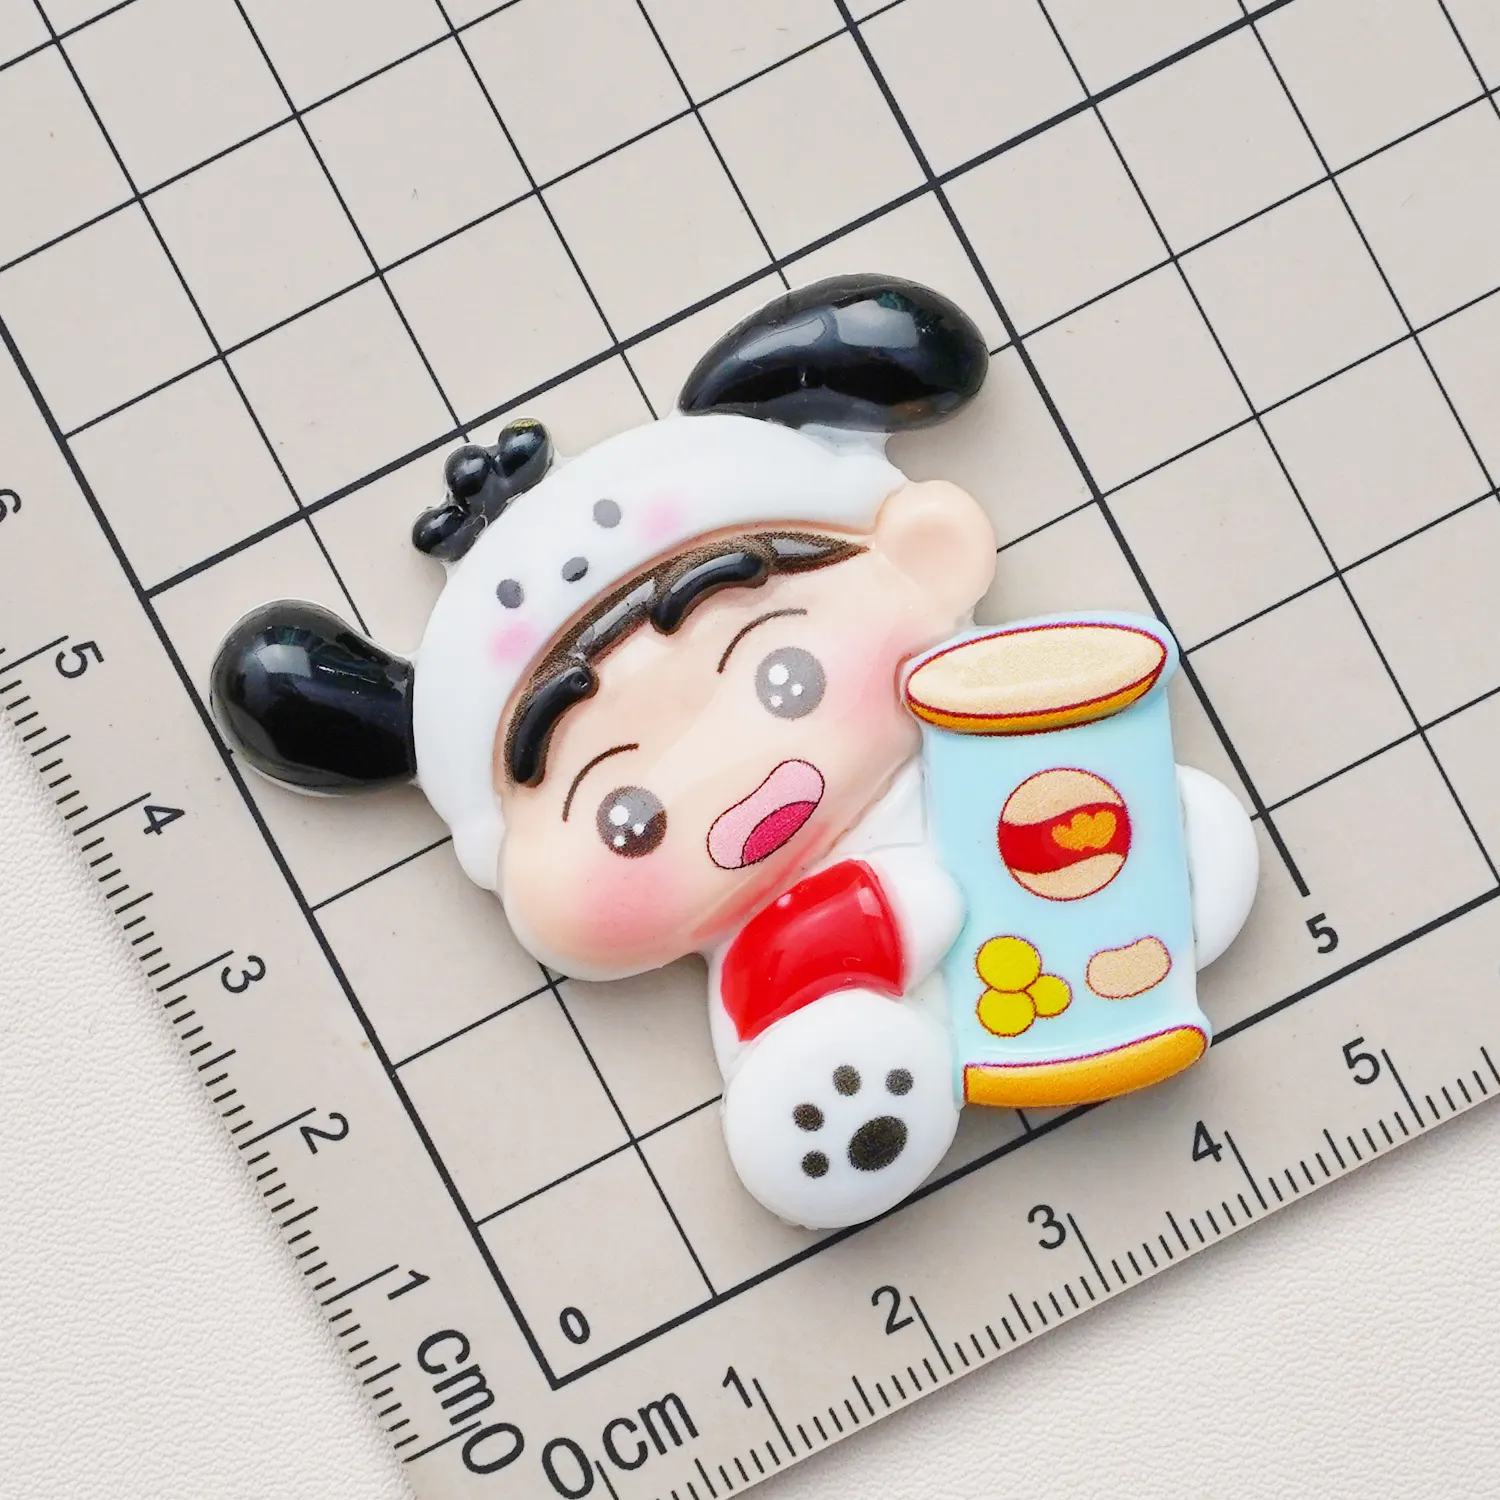 Kawaii Hot Selling Sanrio Xiao Xin Flatback Charms Resin Accessories For Key Chain Pendant Refrigerator Magnet Phone Case DIY